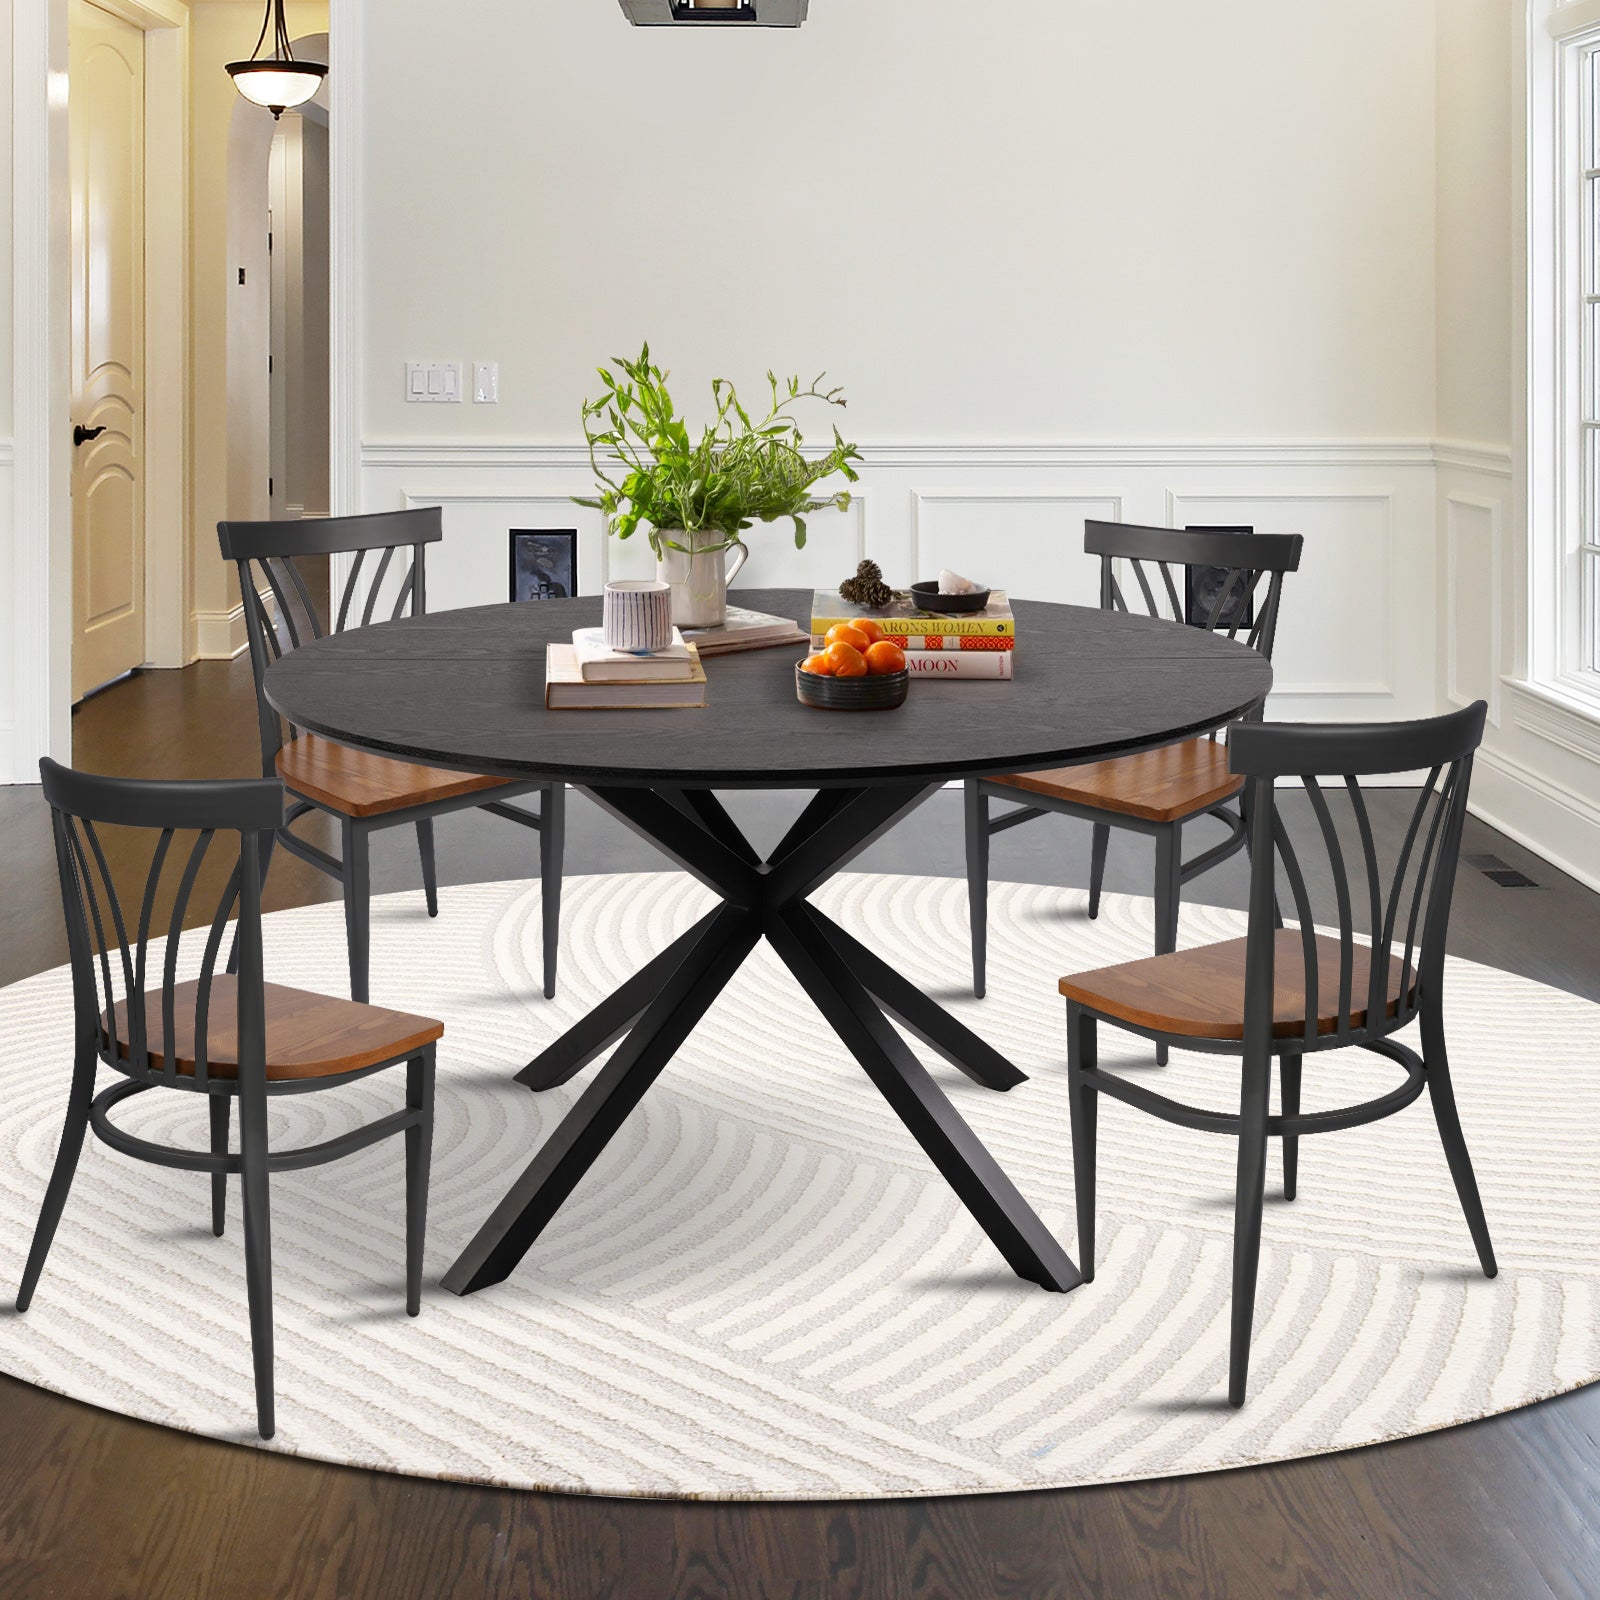 53" Round Mid-Century Modern Wooden Kitchen Dining Table for 4-6 with Solid Metal Leg, Black Wood Grain